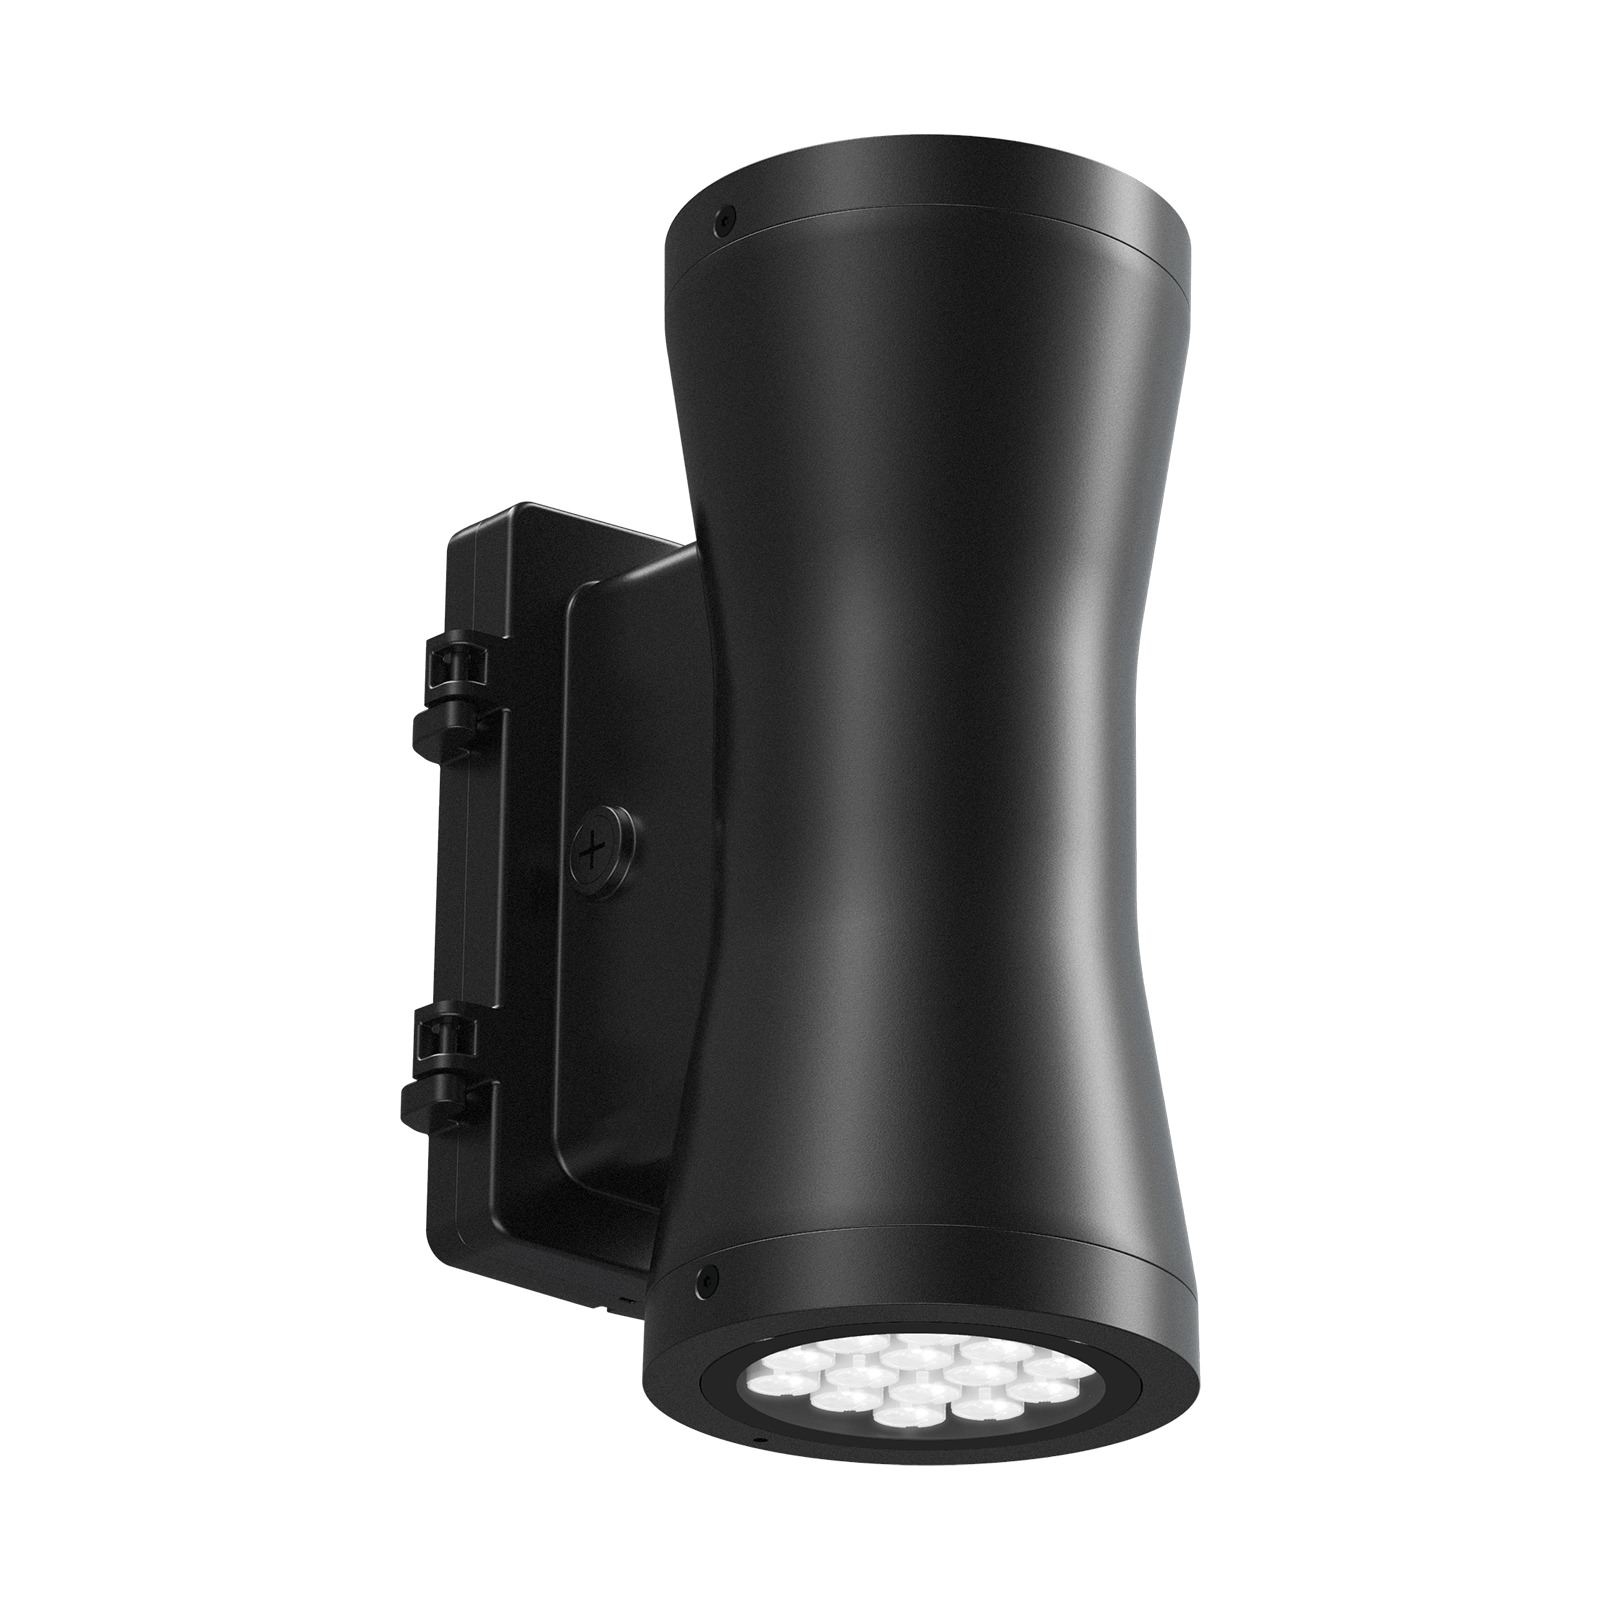 WP07 Cylinder Wall Light with Up and Down Light Emission